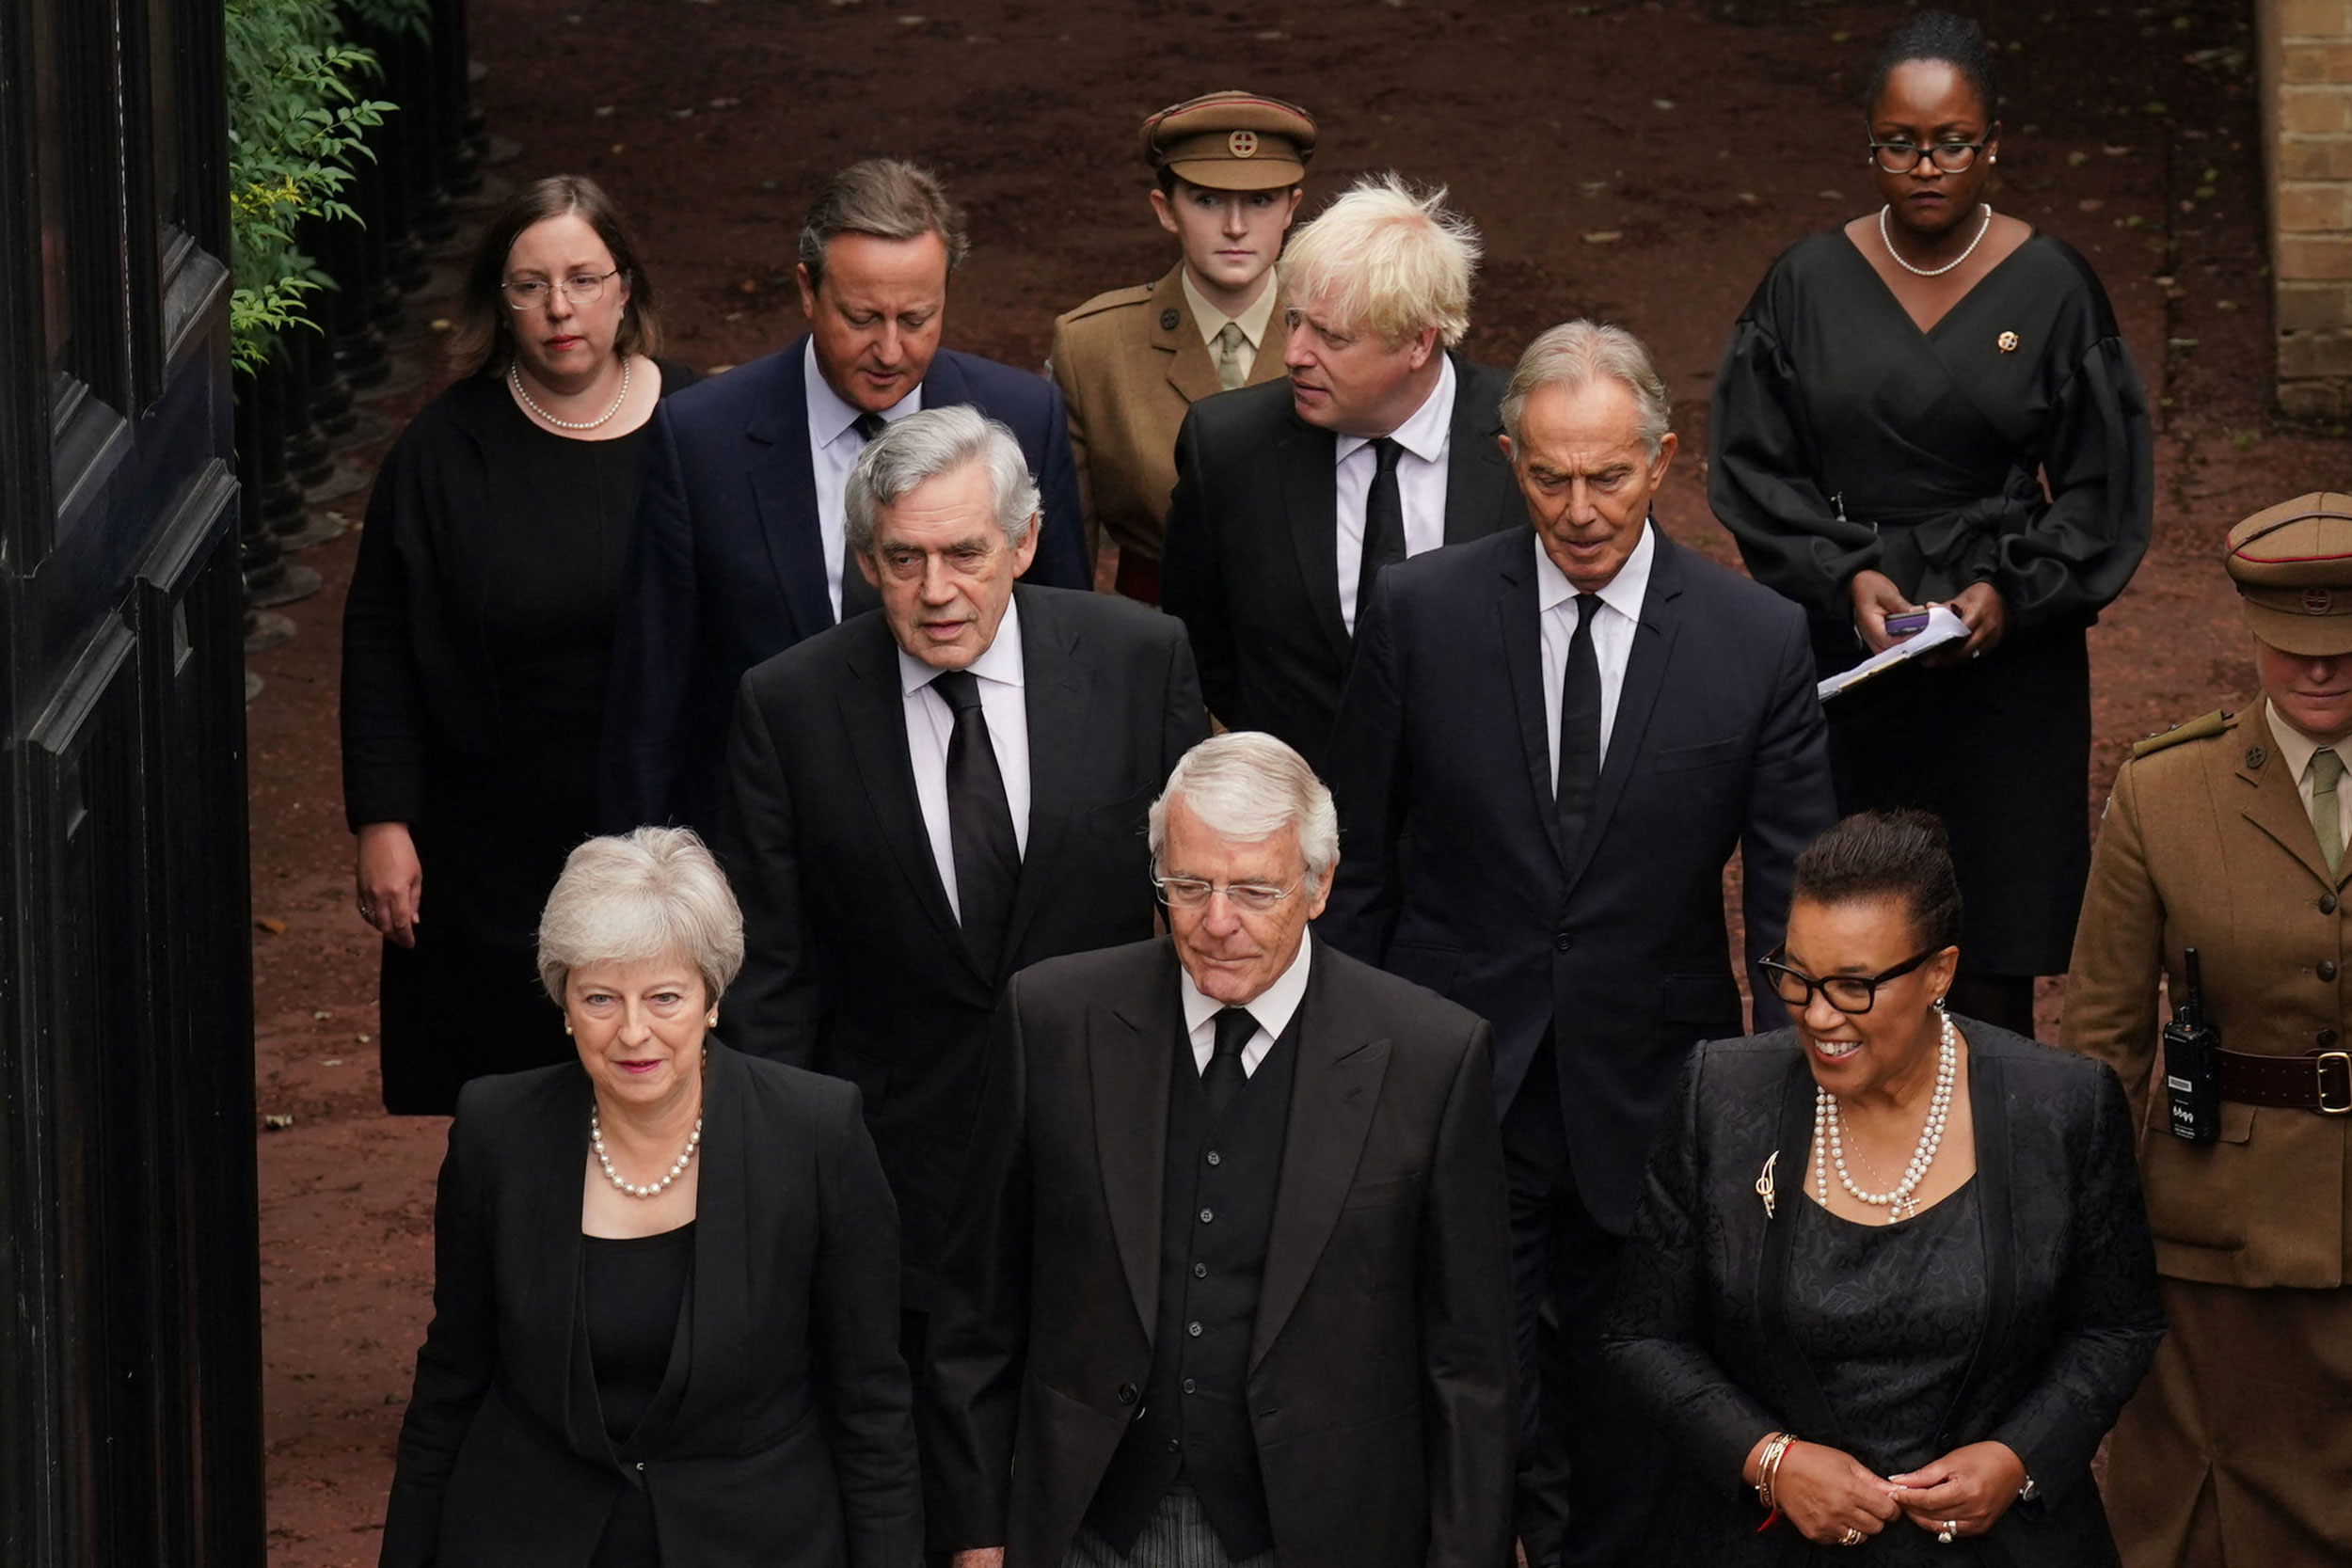 Former British prime ministers attend the ceremony at St. James's Palace on Saturday. In the front row, from left, are Theresa May and John Major, along with Baroness Patricia Scotland. In the second row are Gordon Brown, left, and Tony Blair. Behind them are David Cameron and Boris Johnson.